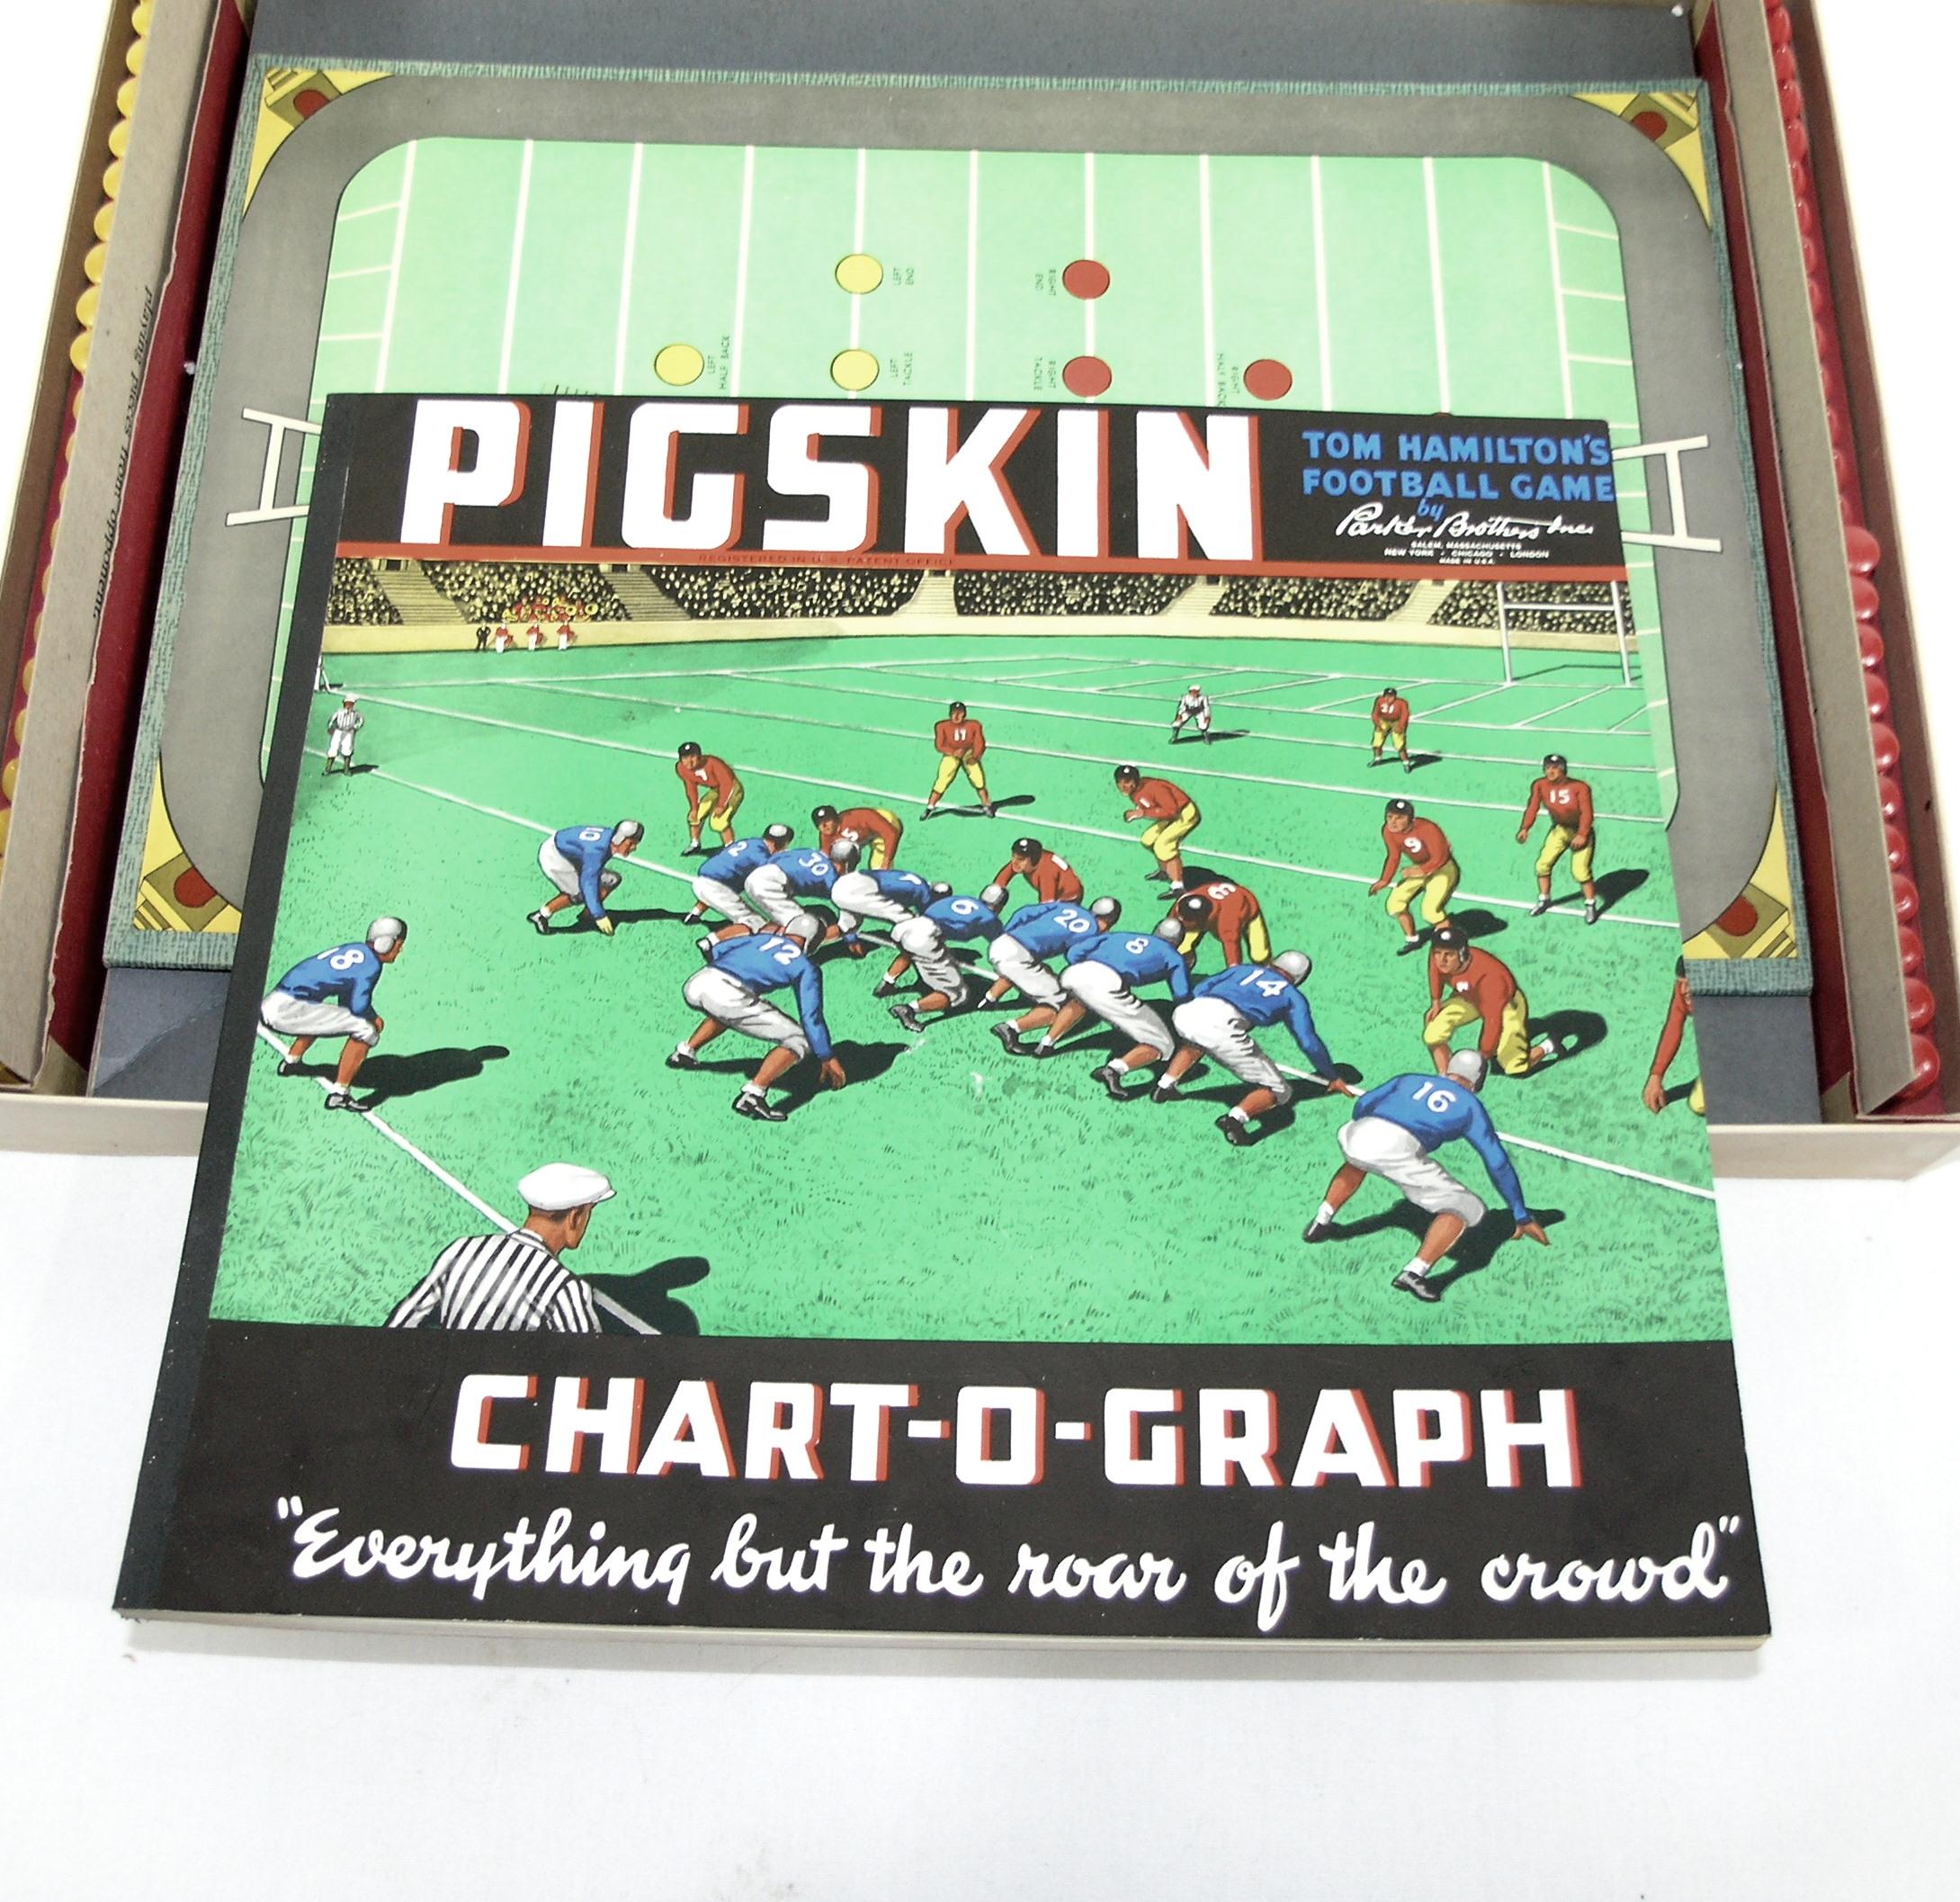 1946 Tom Hamiltons "Pigskin" Football Board Game by Parker Brothers Inc. Co